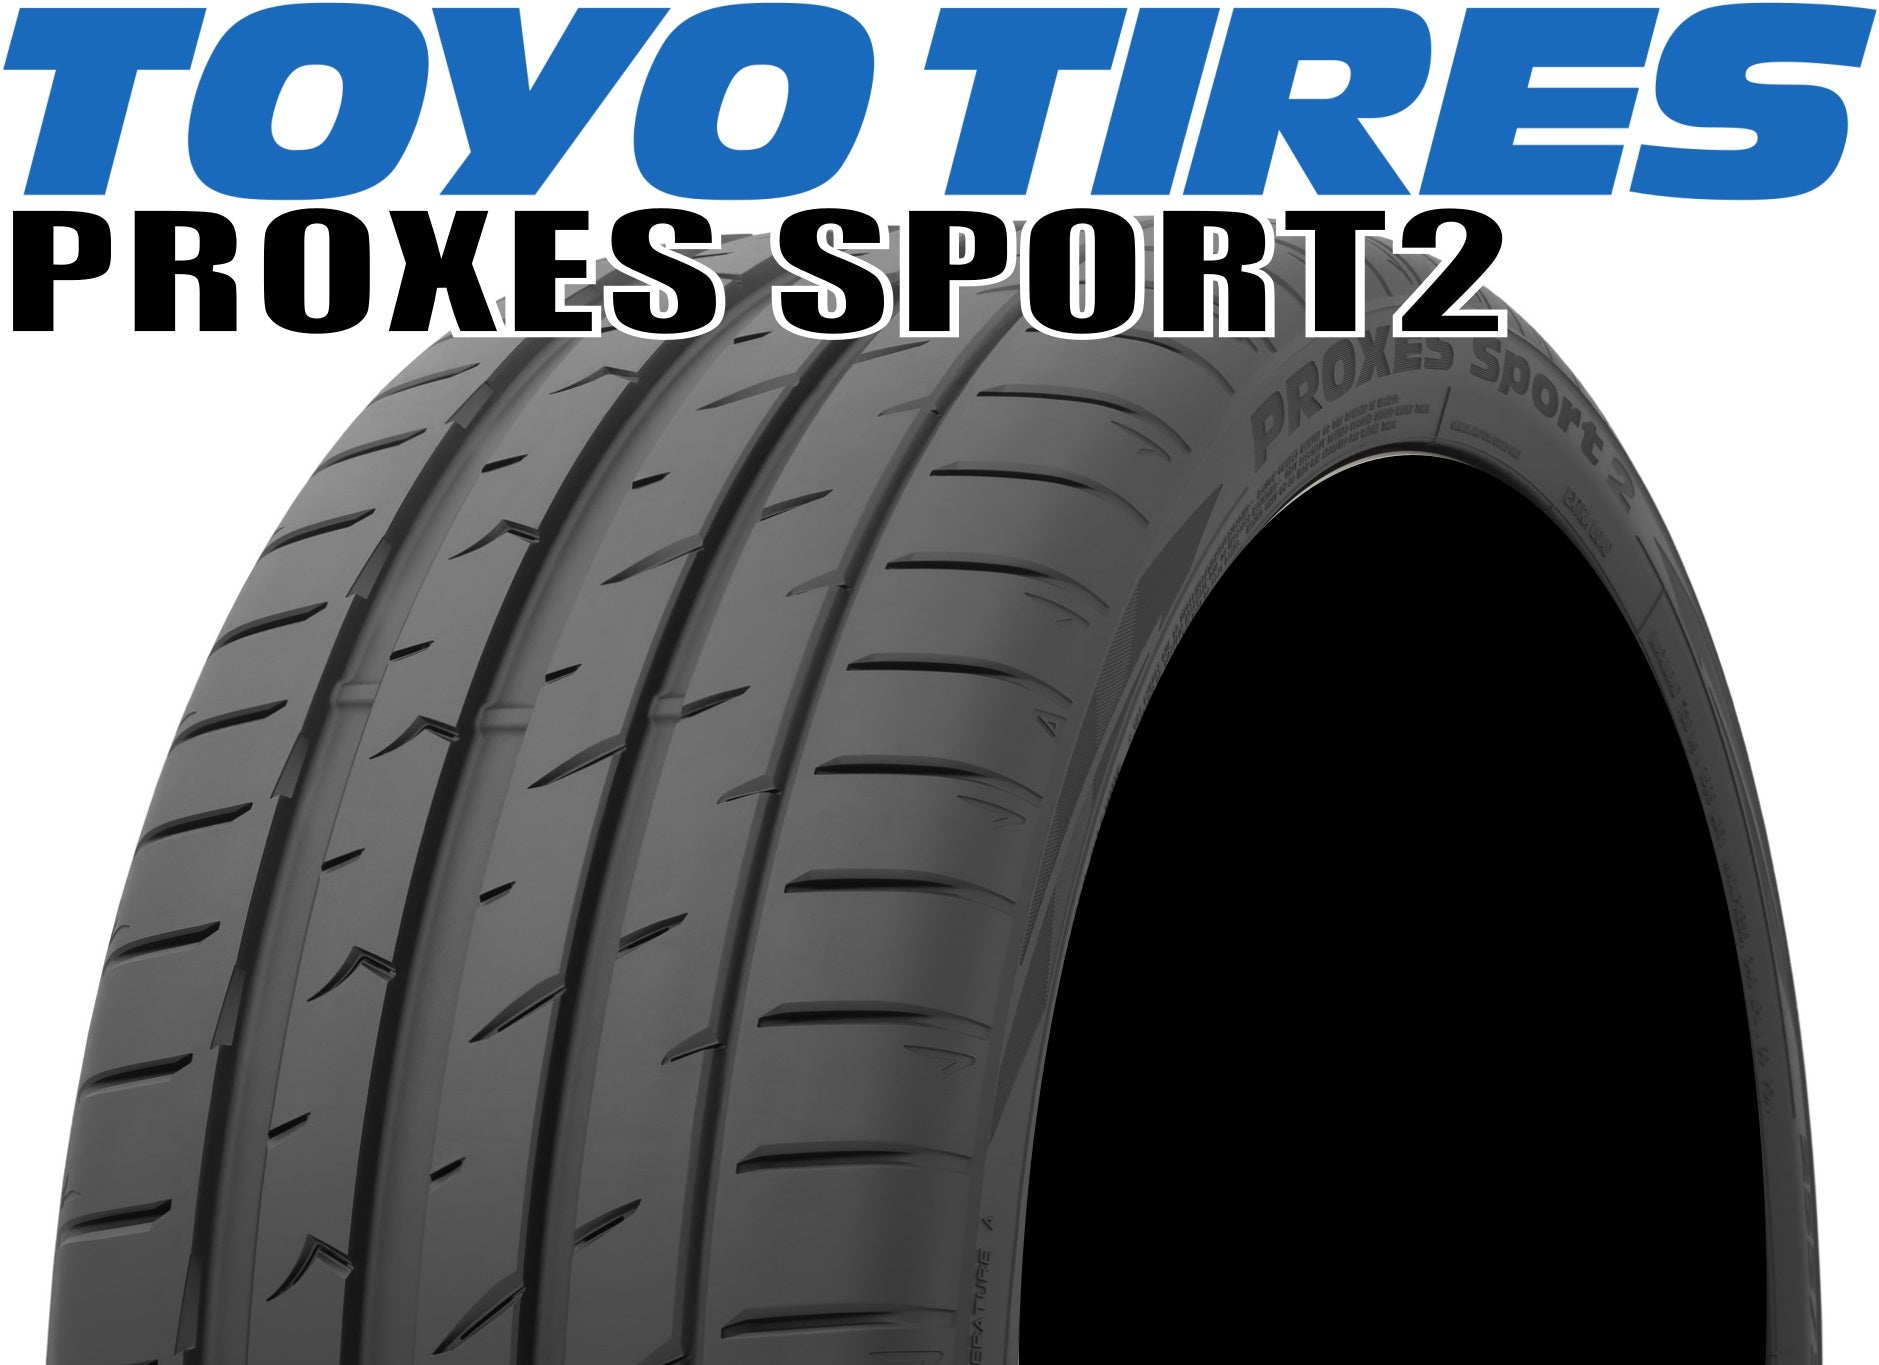 TOYO TIRES PROXES SPORT2(トーヨー プロクセススポーツ) 245/40ZR19 98Y 245/40-19